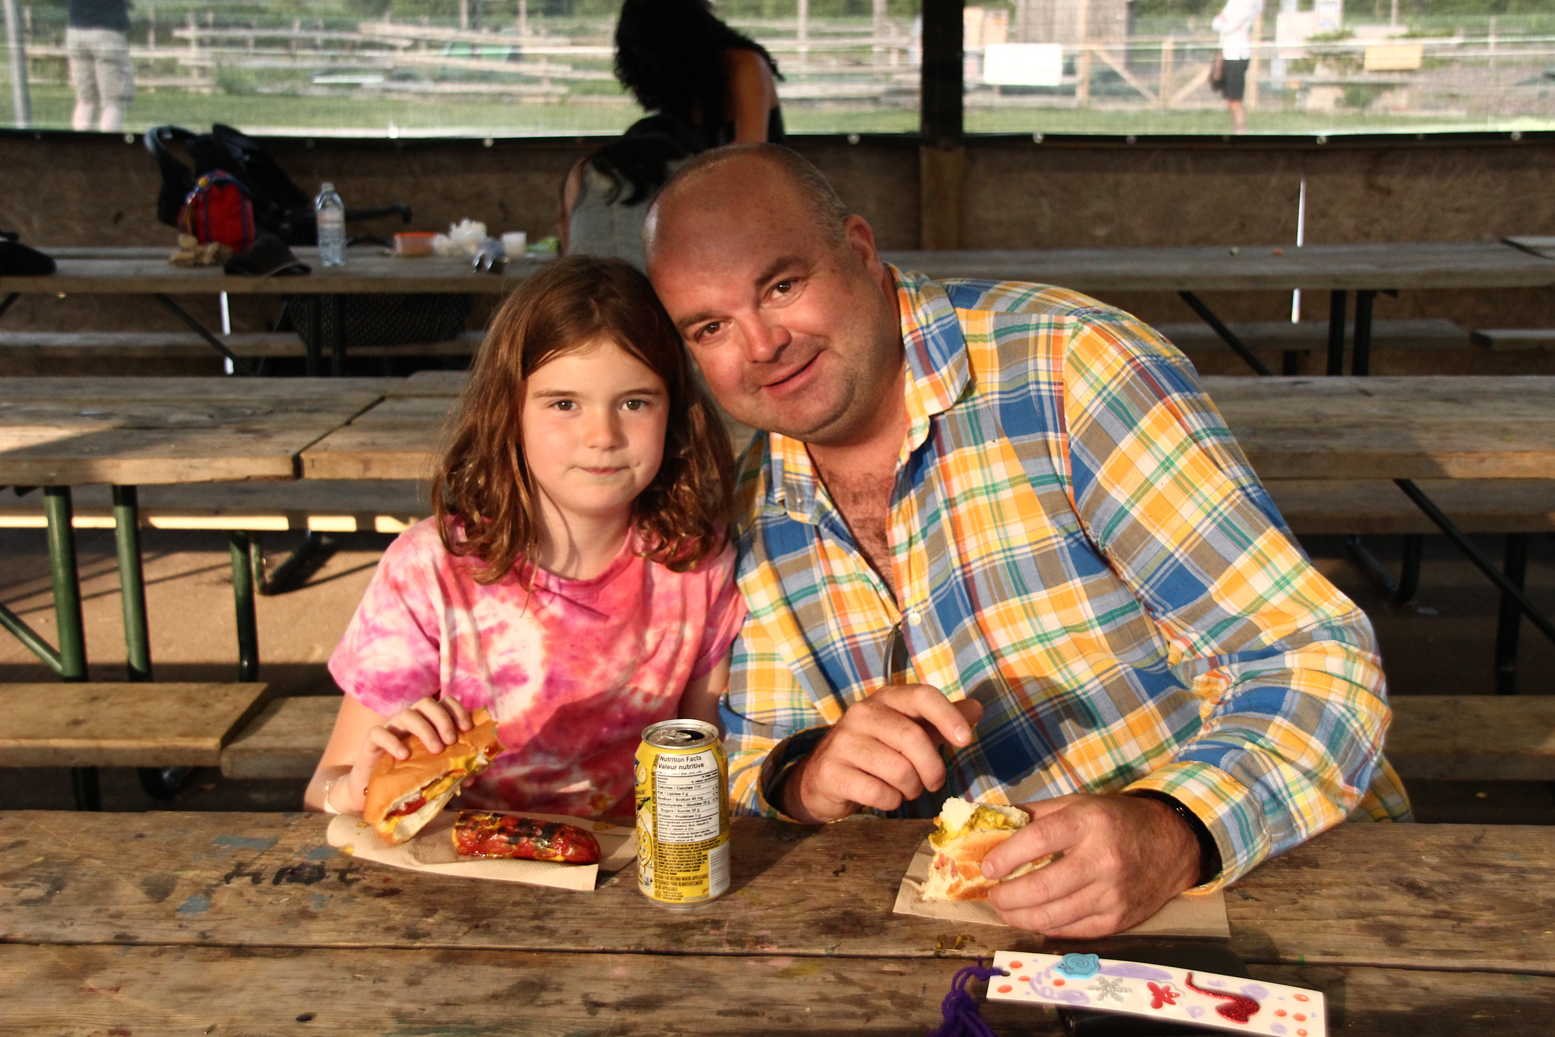 A father and daughter enjoy a hot dog together at Camp Robin Hood during one of our open house events where parents can see why kids think this is the best camp in the world!